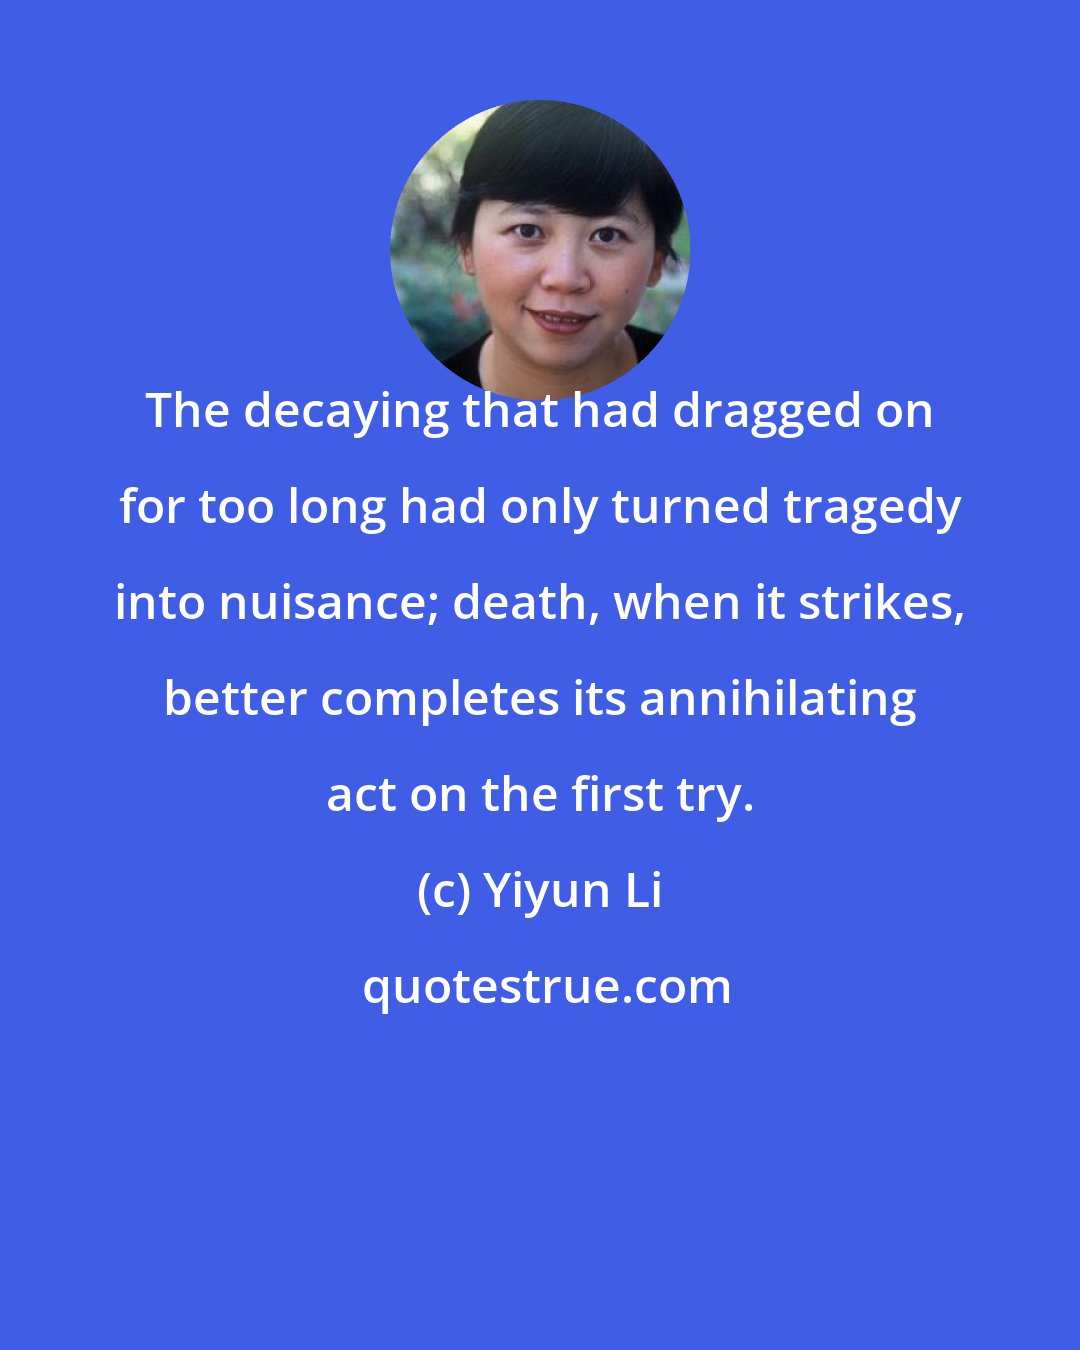 Yiyun Li: The decaying that had dragged on for too long had only turned tragedy into nuisance; death, when it strikes, better completes its annihilating act on the first try.